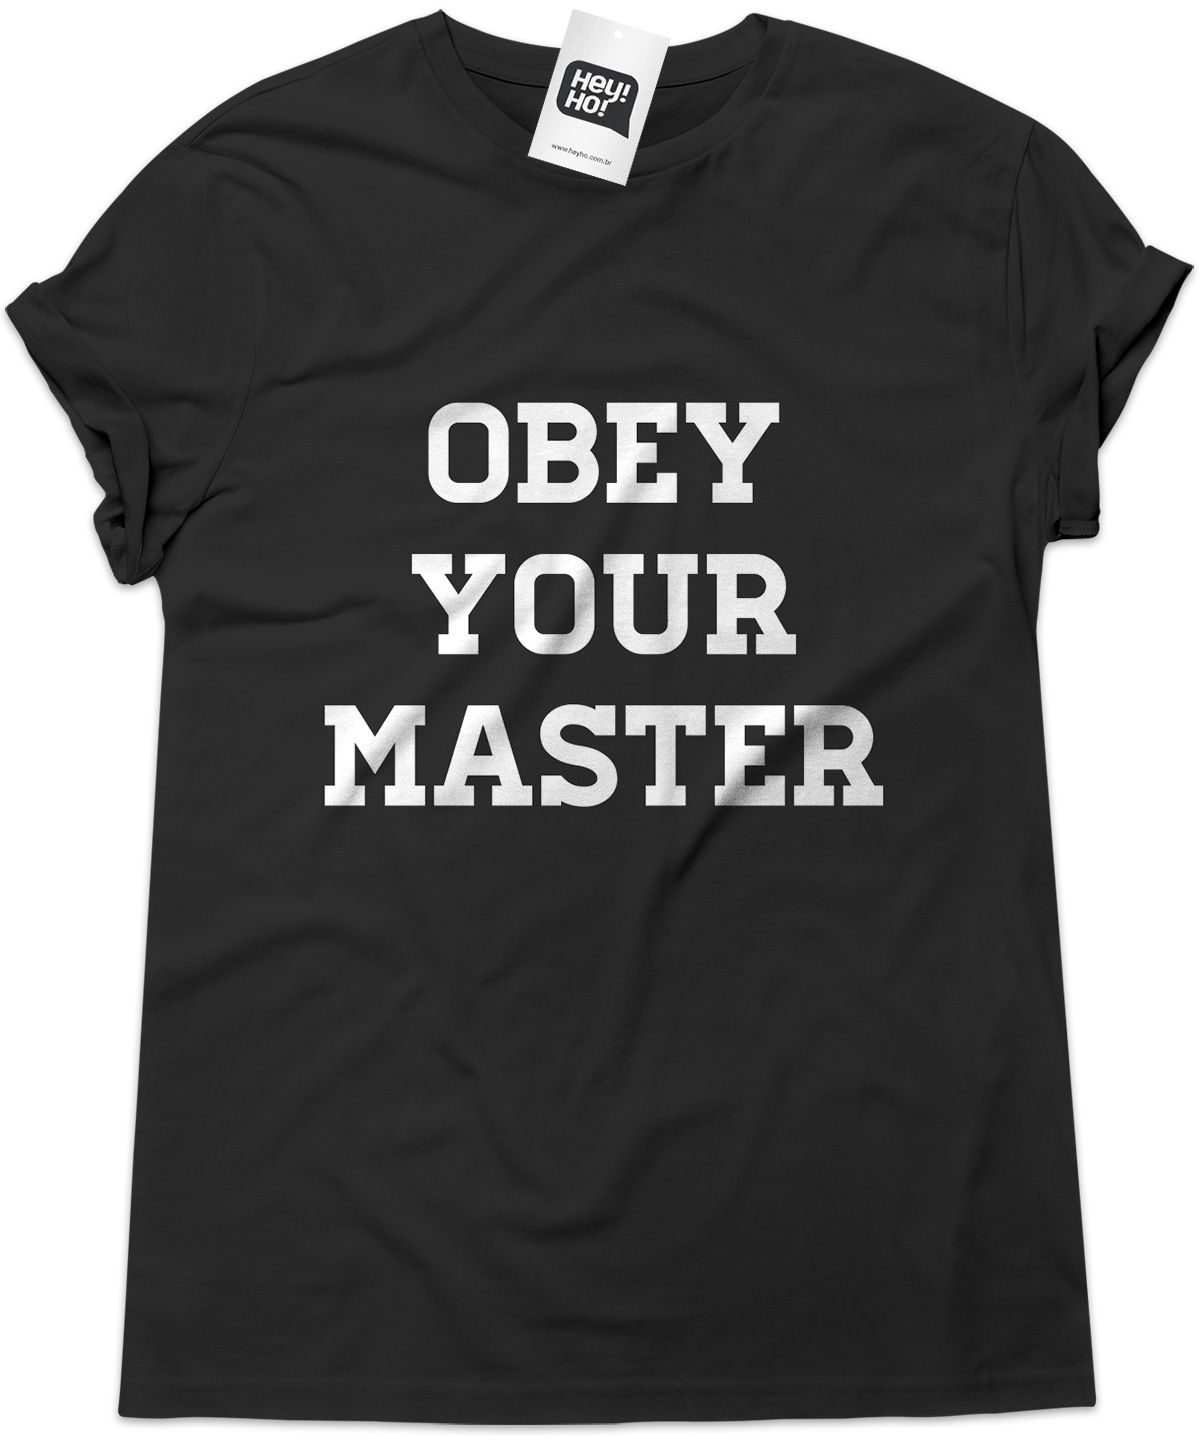 METALLICA - Obey your master